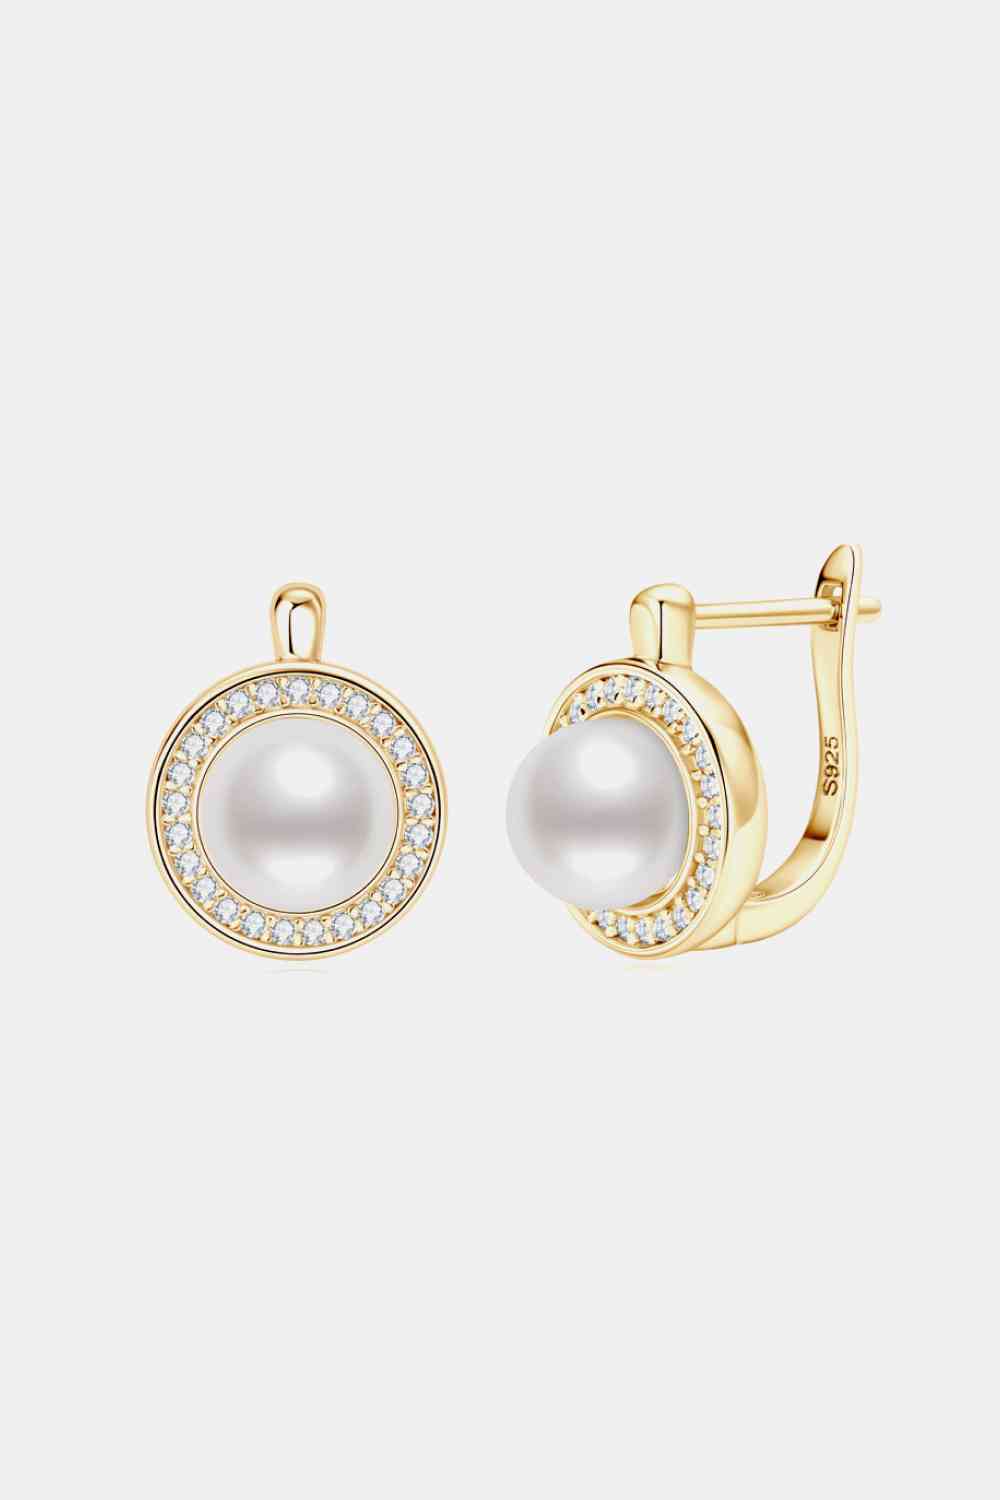 Pearl and Moissanite Sterling Silver Earrings